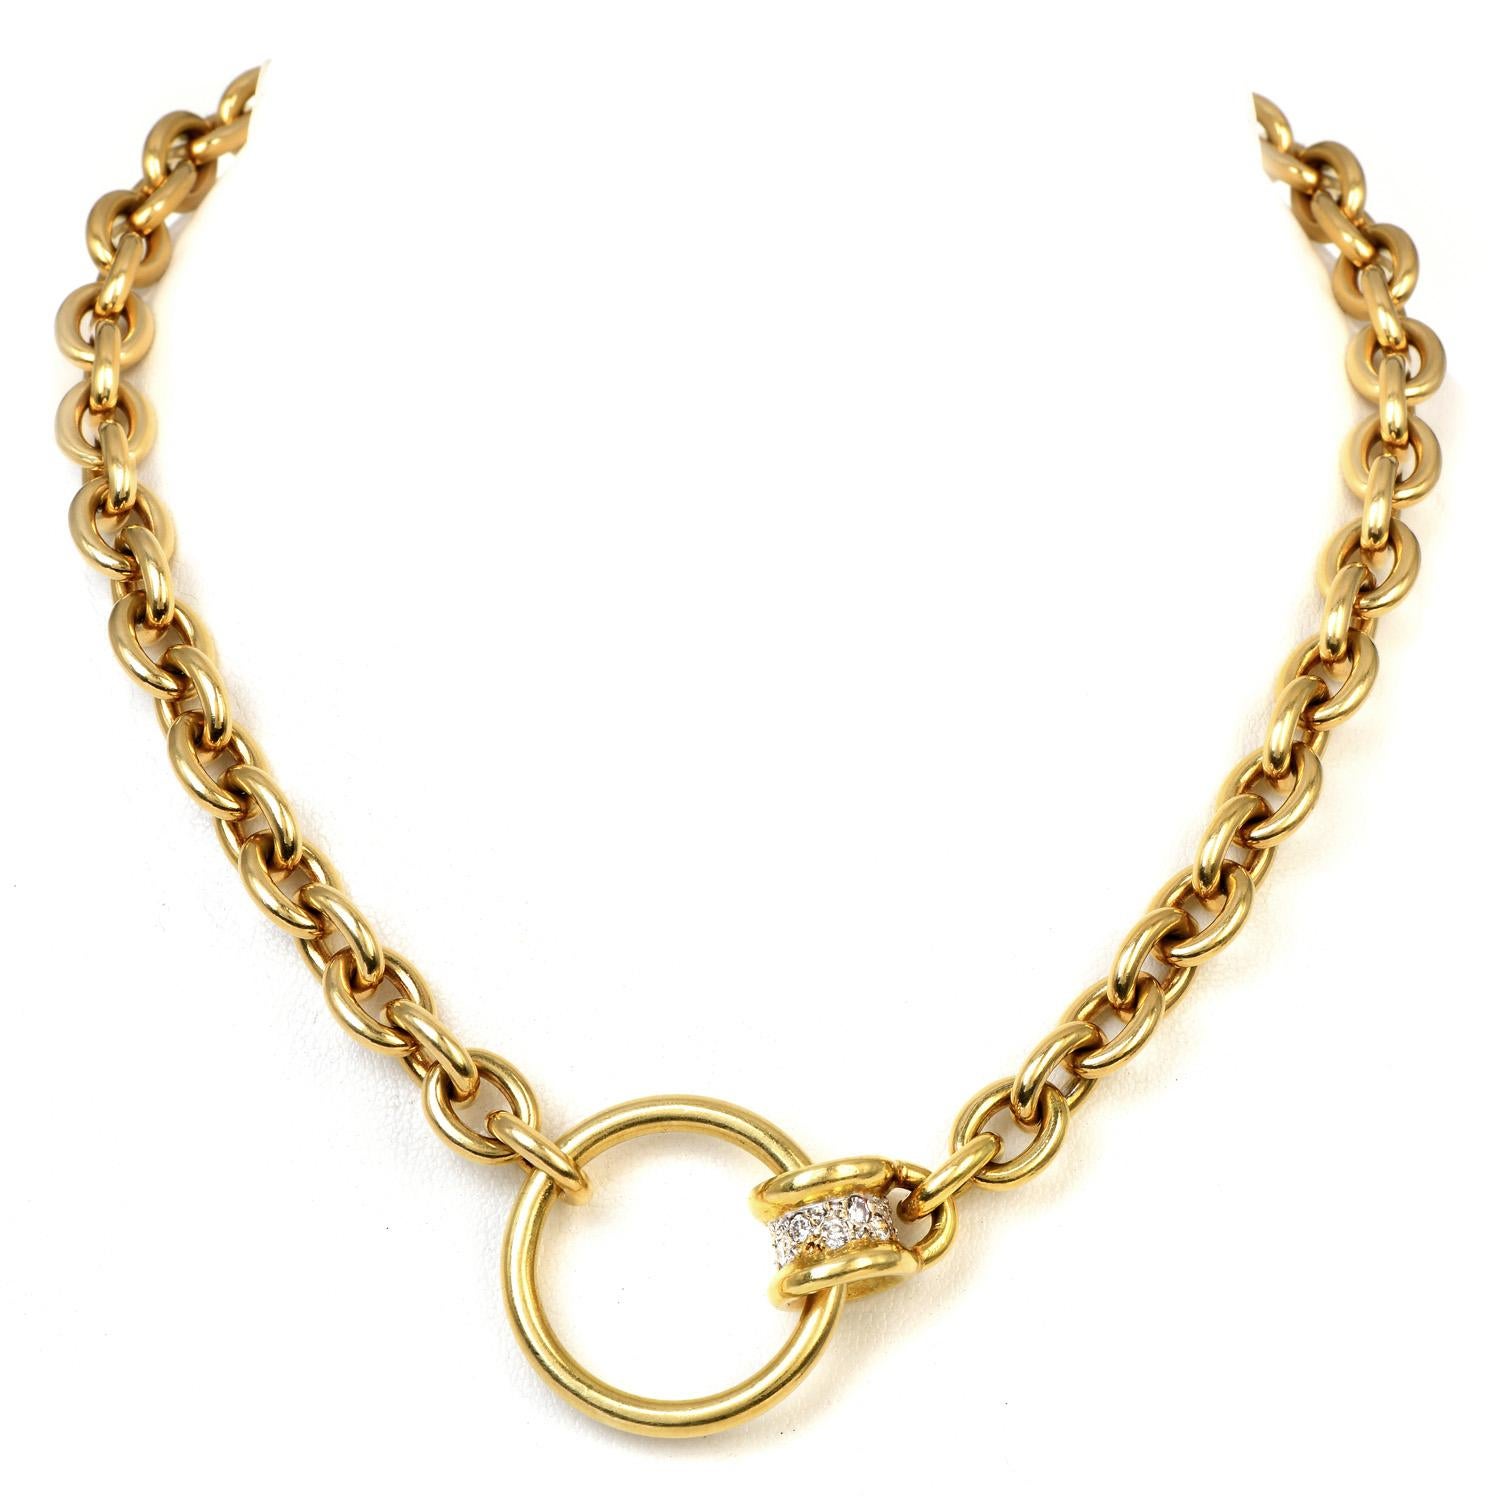 Feel Good with This Italian Heavy Italian diamond Link 18K Gold Choker Chain Necklace. This circa 1980S Italian Heavy oval-link chain necklace is crafted in solid 18 yellow gold. It weighs 99.1 grams and measures 16